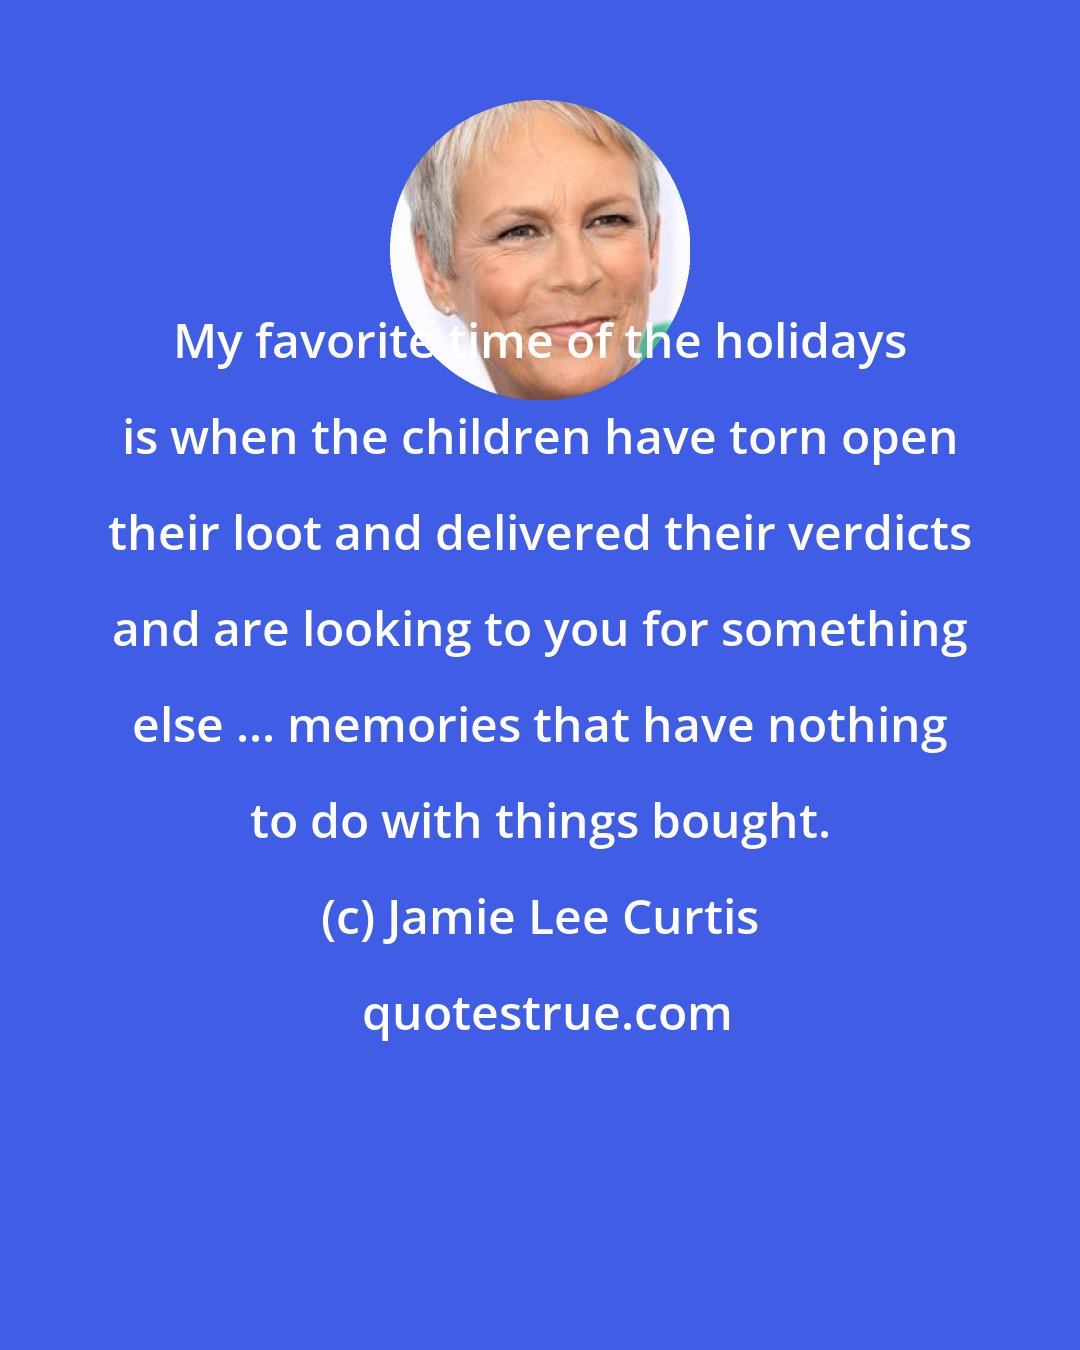 Jamie Lee Curtis: My favorite time of the holidays is when the children have torn open their loot and delivered their verdicts and are looking to you for something else ... memories that have nothing to do with things bought.